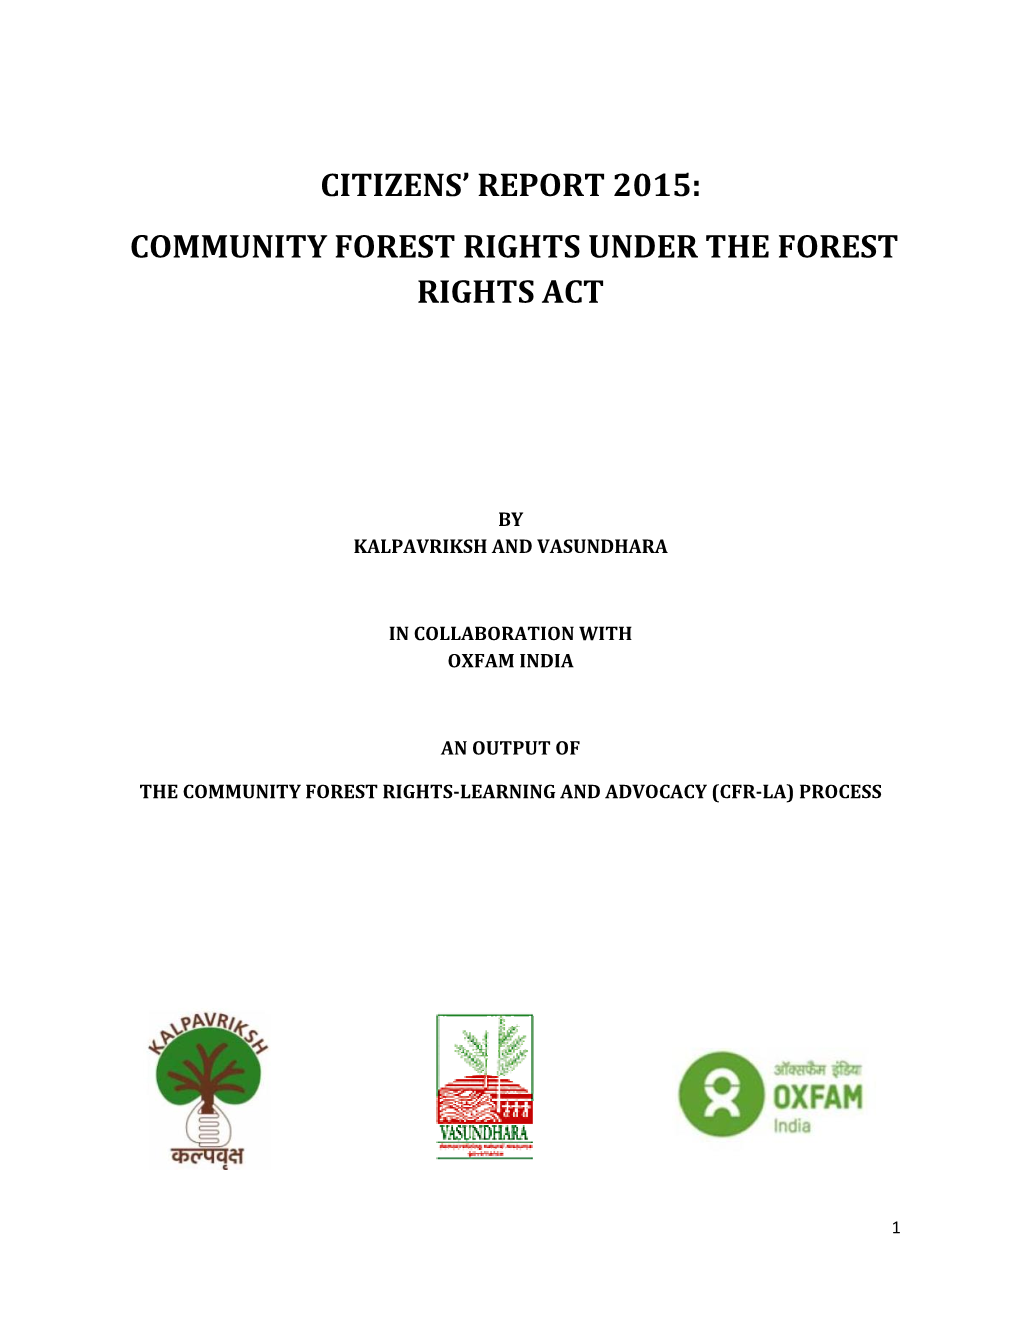 Citizens' Report 2015: Community Forest Rights Under the Forest Rights